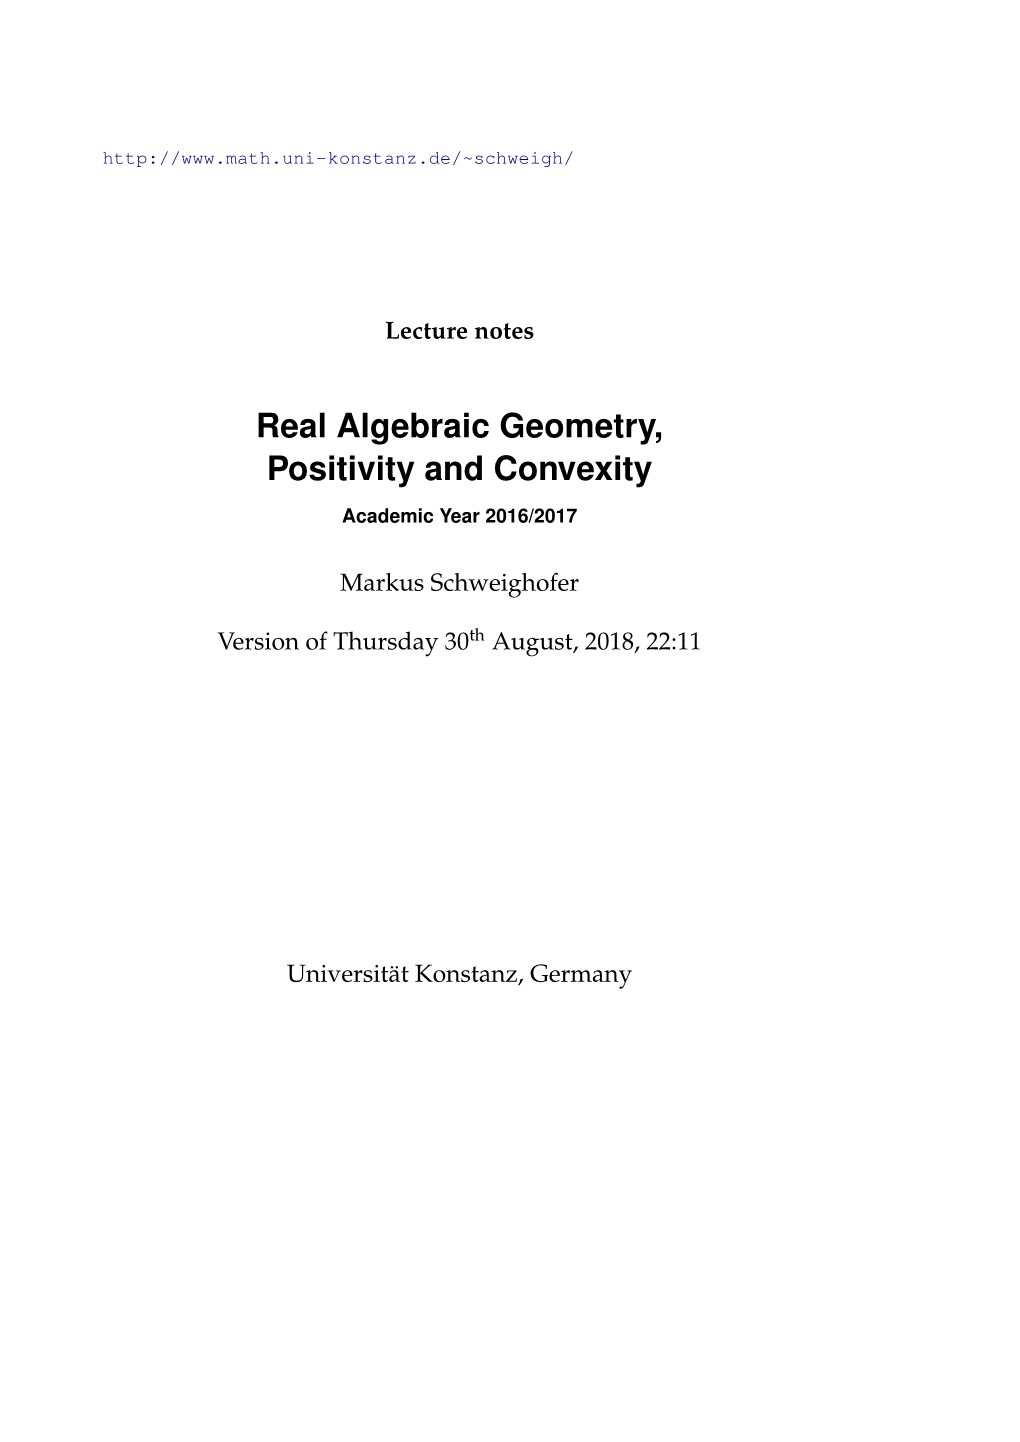 Real Algebraic Geometry, Positivity and Convexity